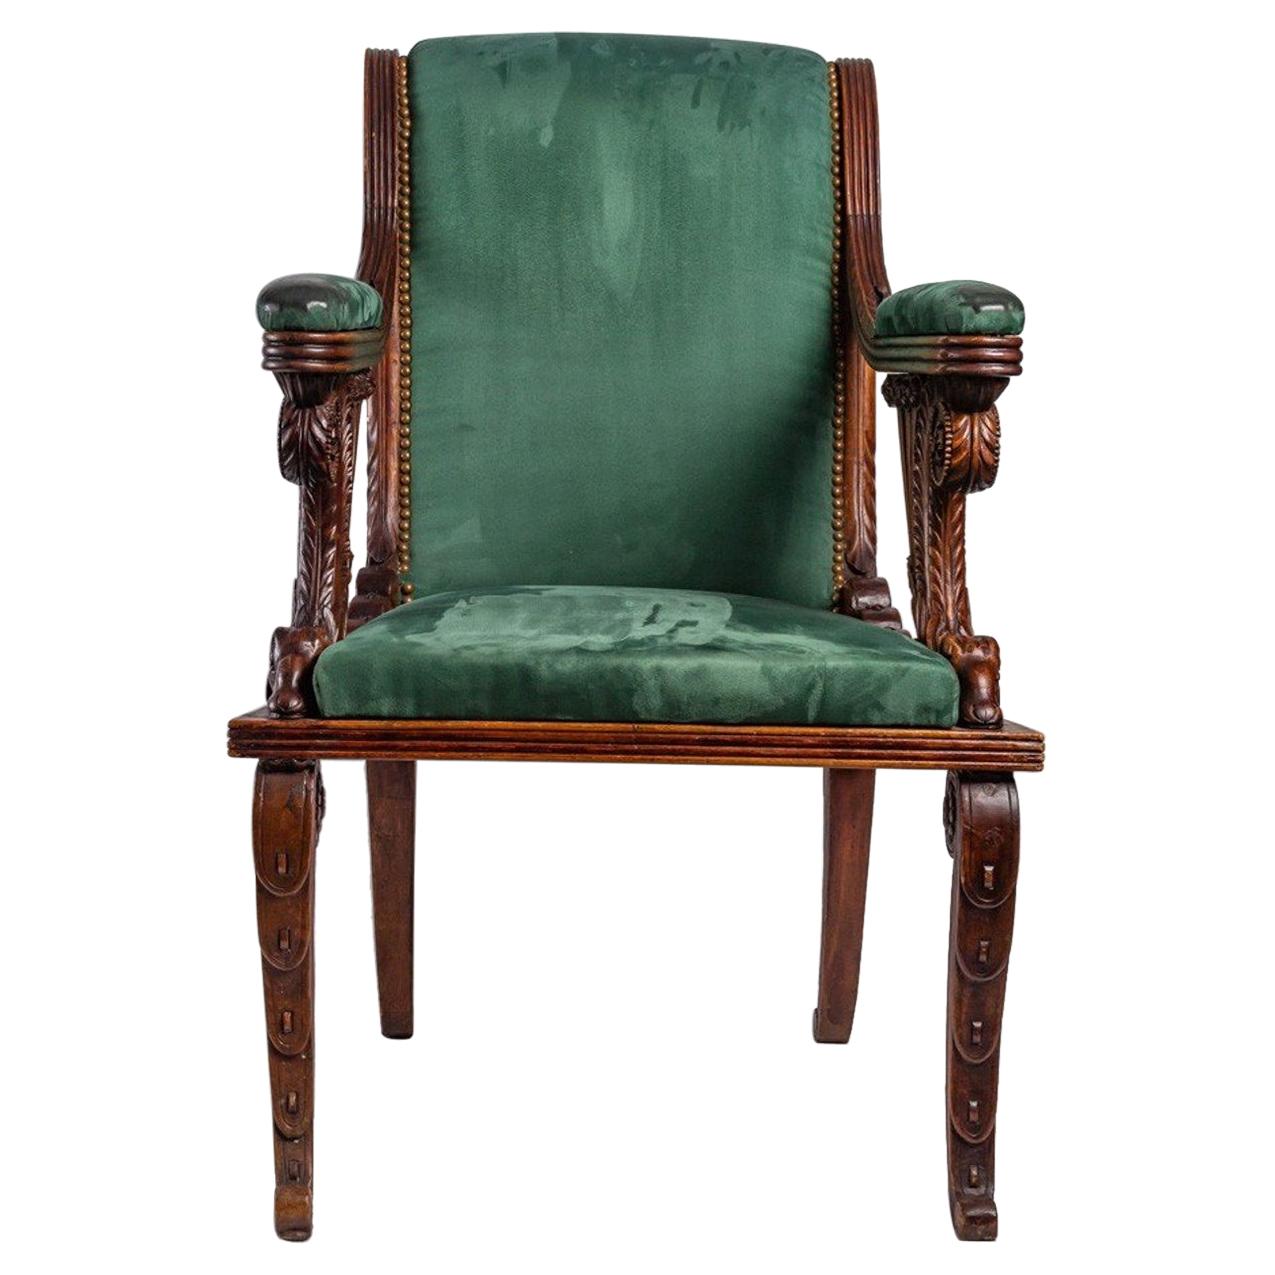 Carved Wooden Desk Armchair, 19th Century